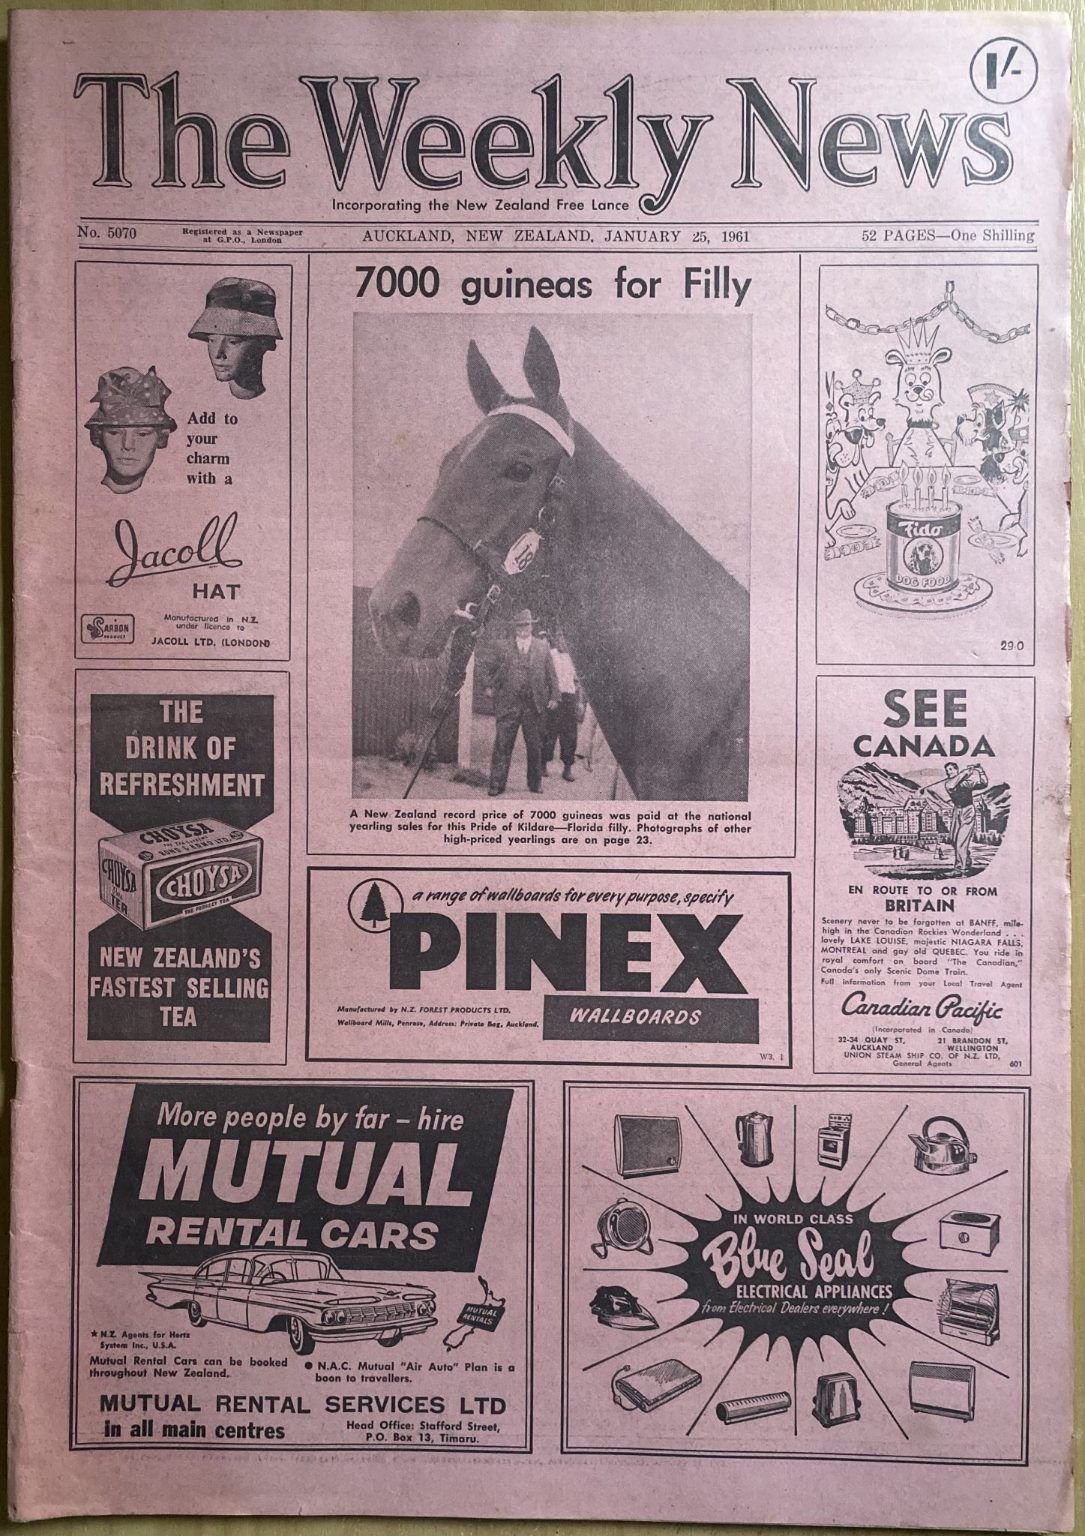 OLD NEWSPAPER: The Weekly News, No. 5070, 25 January 1961